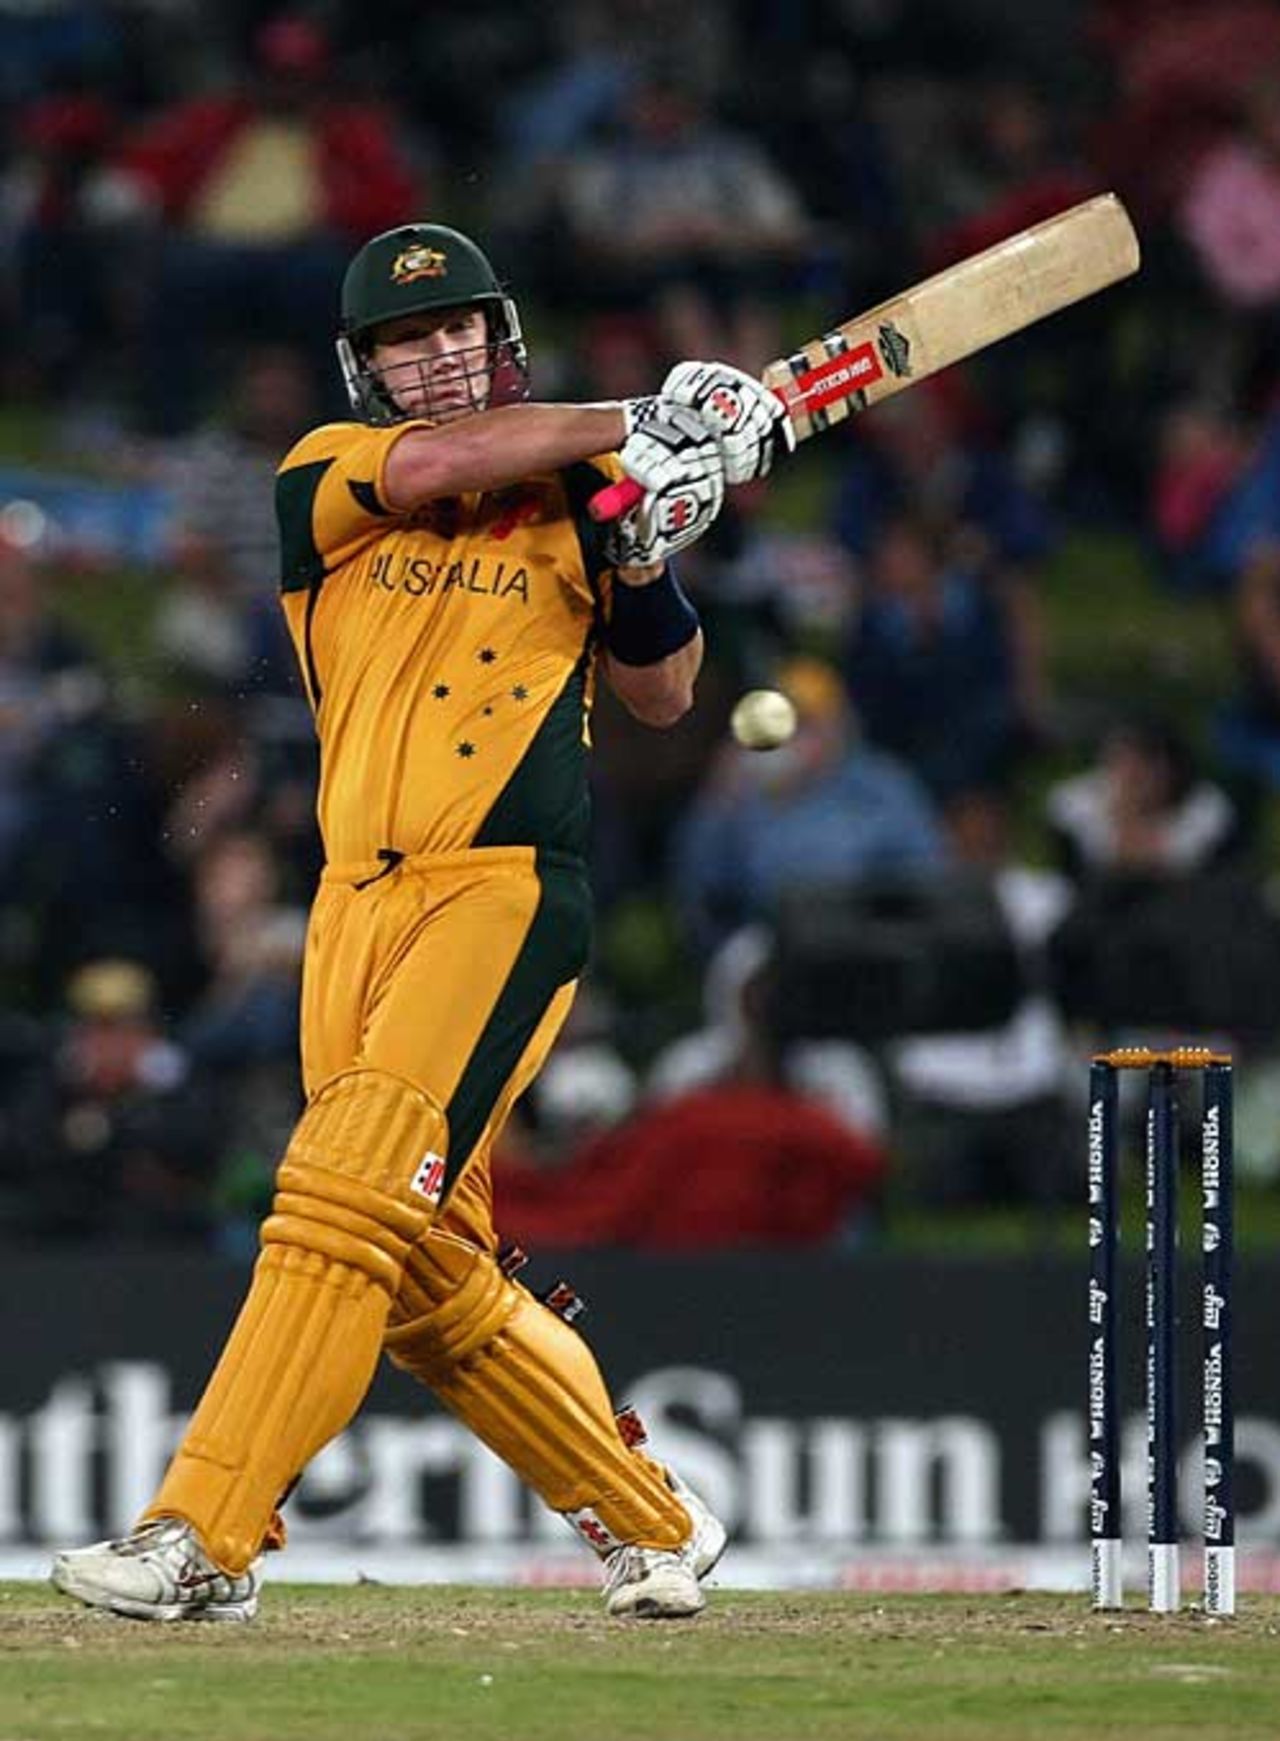 Cameron White played a vital innings after the loss of early wickets, Australia v New Zealand, Champions Trophy final, Centurion Park, October 5, 2009